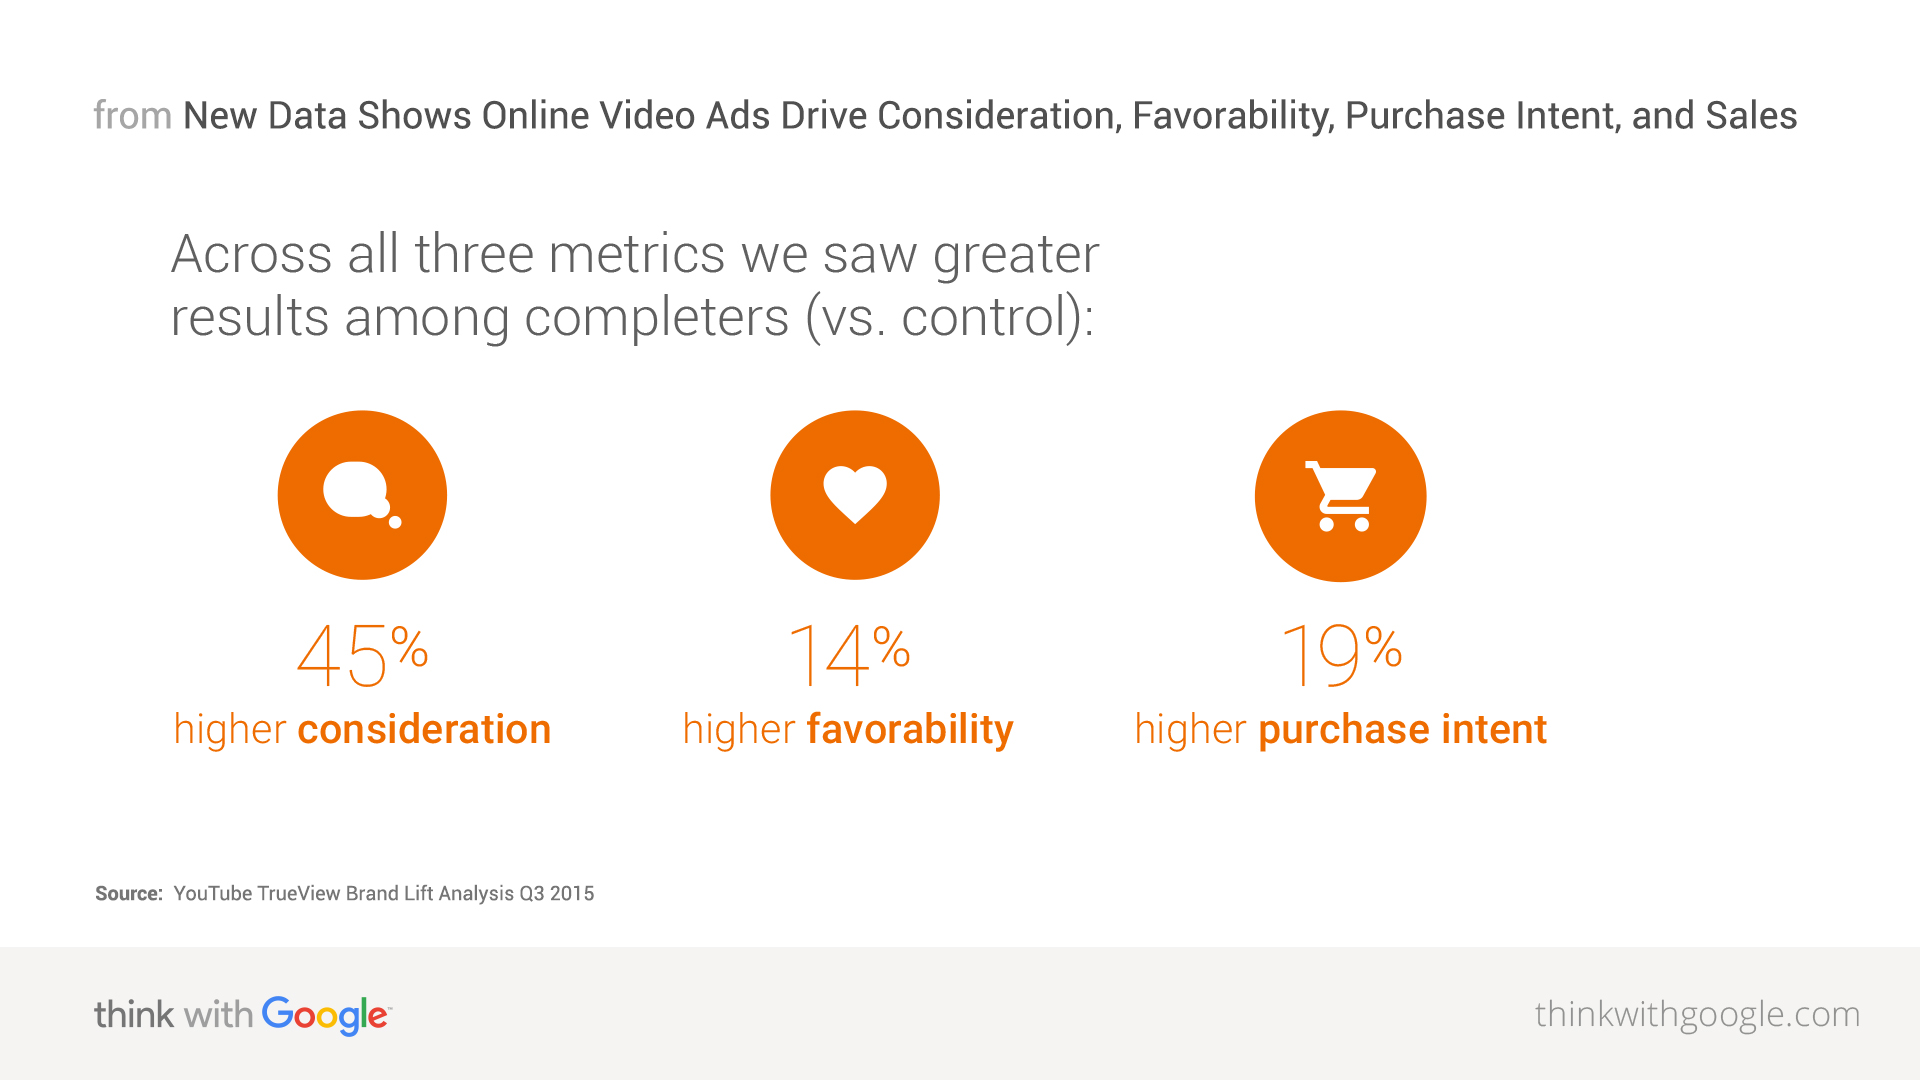 New data shows online video ads drive consideration - Think with Google